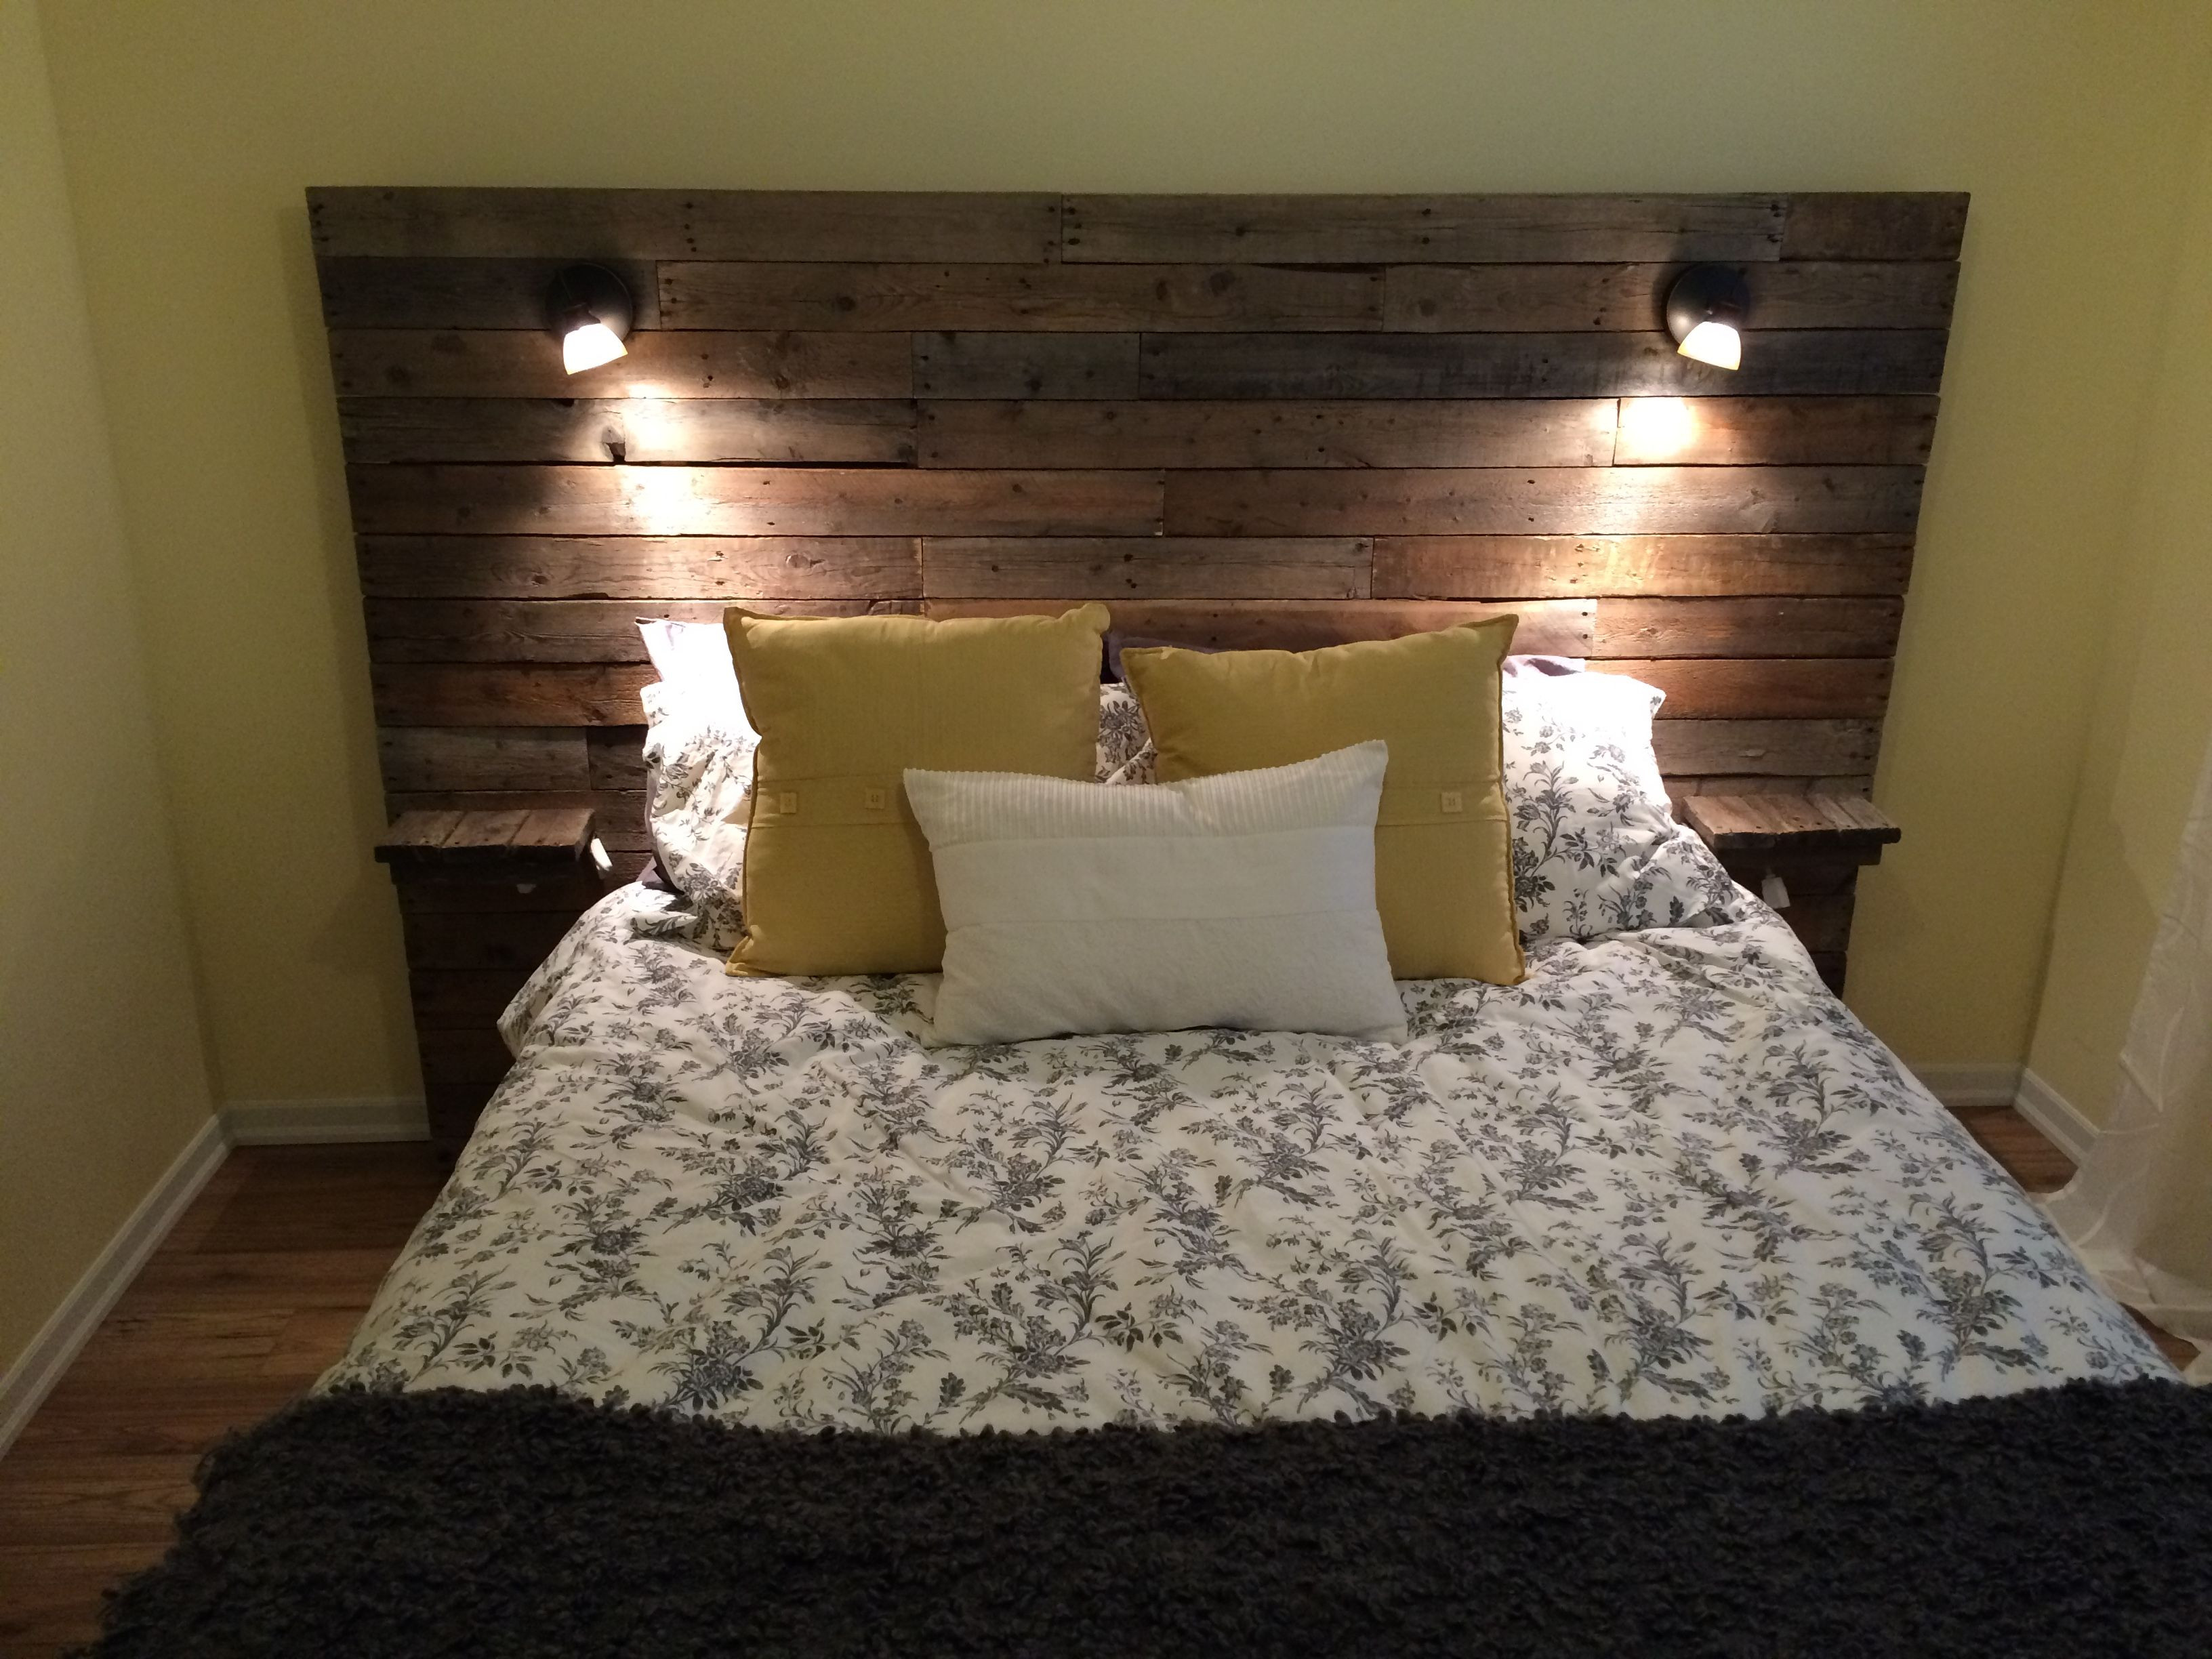 DIY Wooden Headboard With Lights
 Pallet headboard with shelf lights and plugs for cell